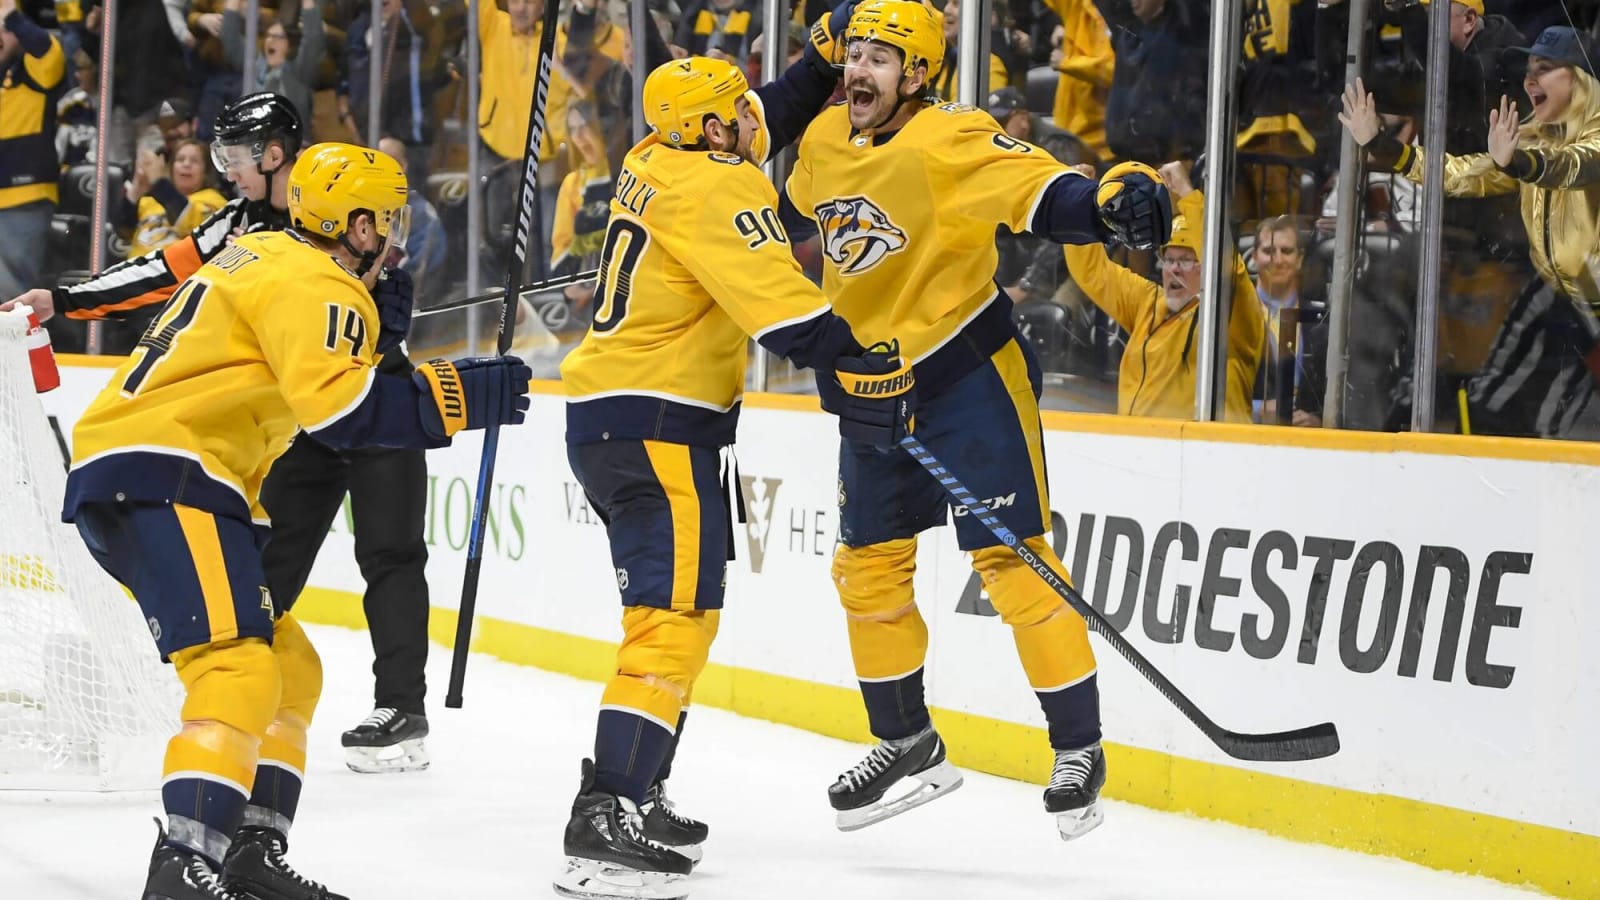 Predators’ Filip Forsberg on playing with Nyquist, O’Reilly: ‘We developed fantastic chemistry from Day 1’